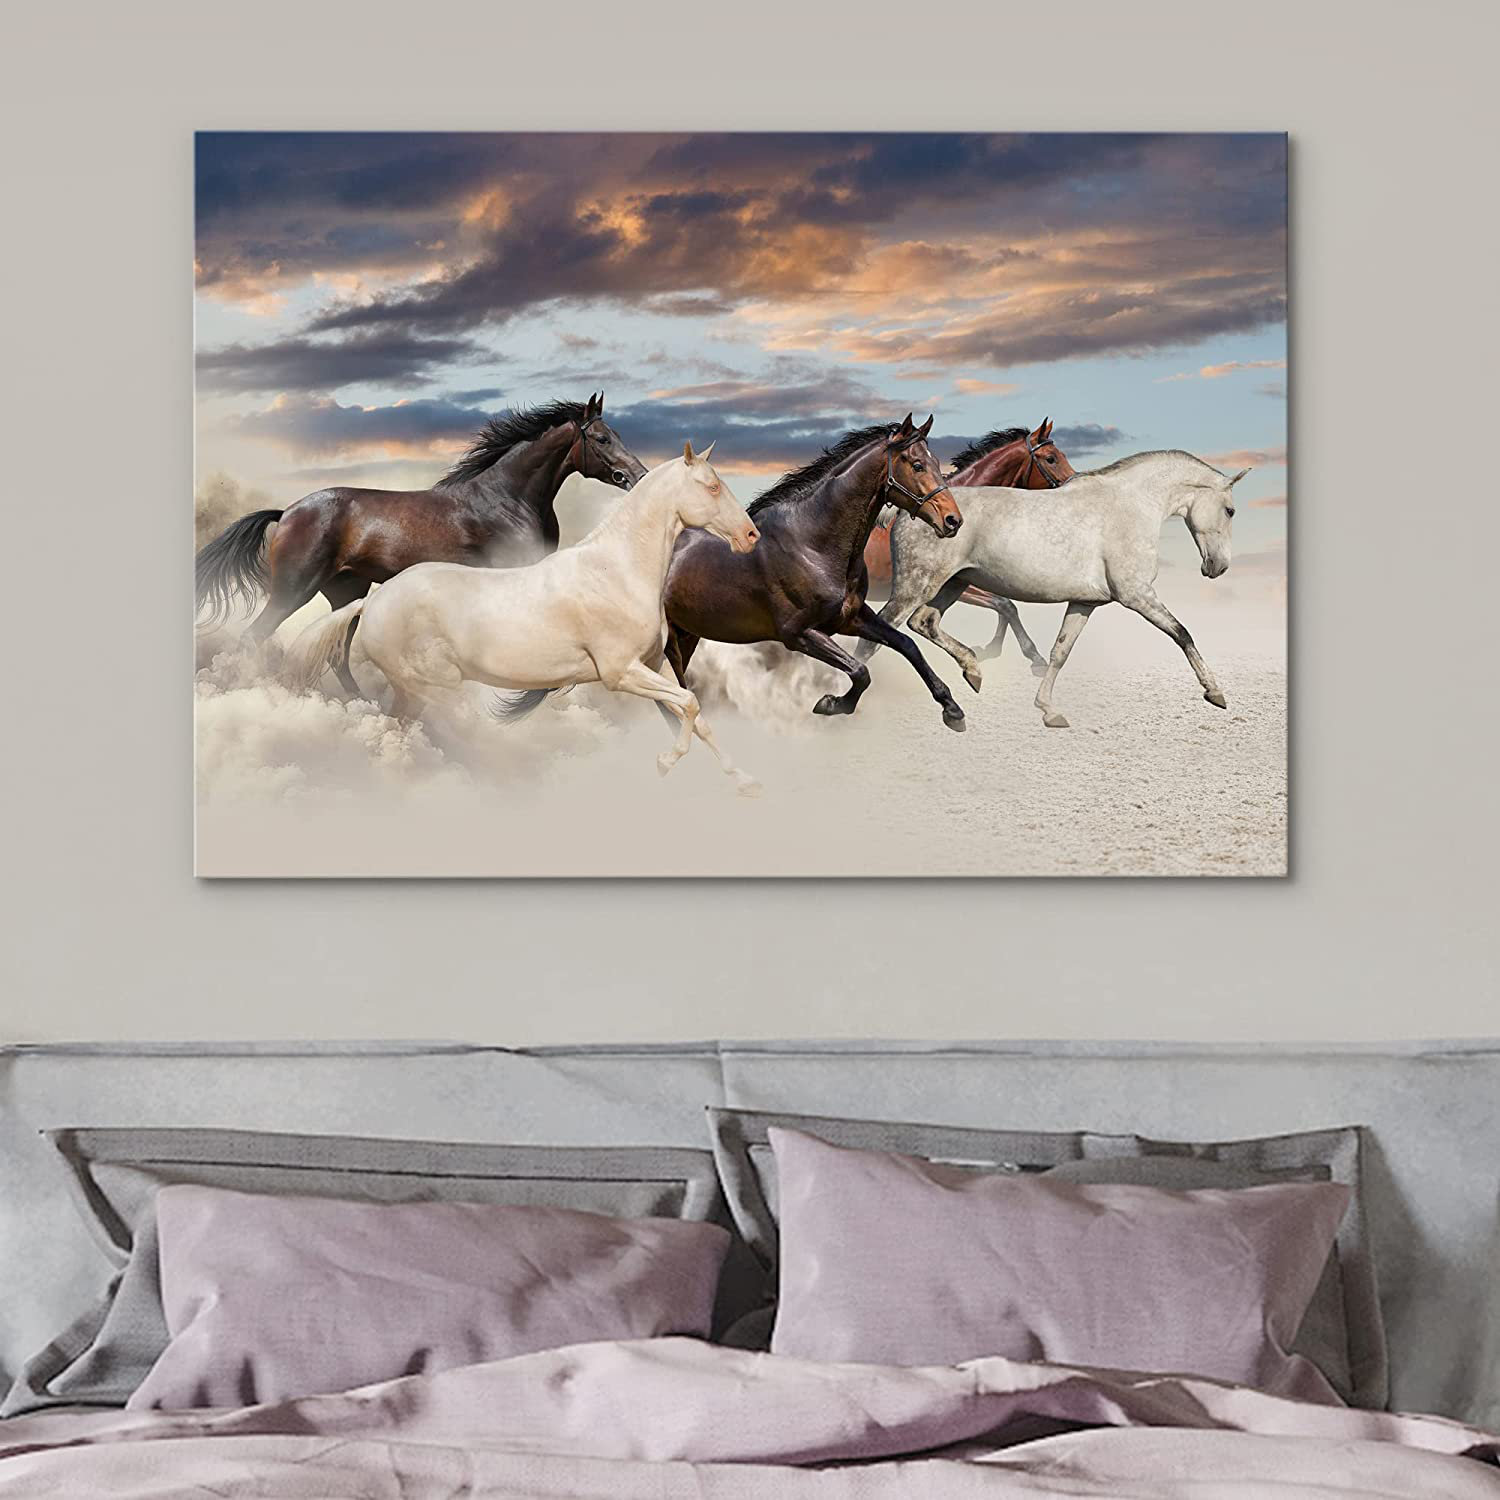 IDEA4WALL Canvas Print Wall Art Brown & White Horse Group At Sunset Animals  Wildlife Photography Modern Art Southwest Scenic Relax/Calm Warm For Living  Room, Bedroom, Office On Canvas Print & Reviews